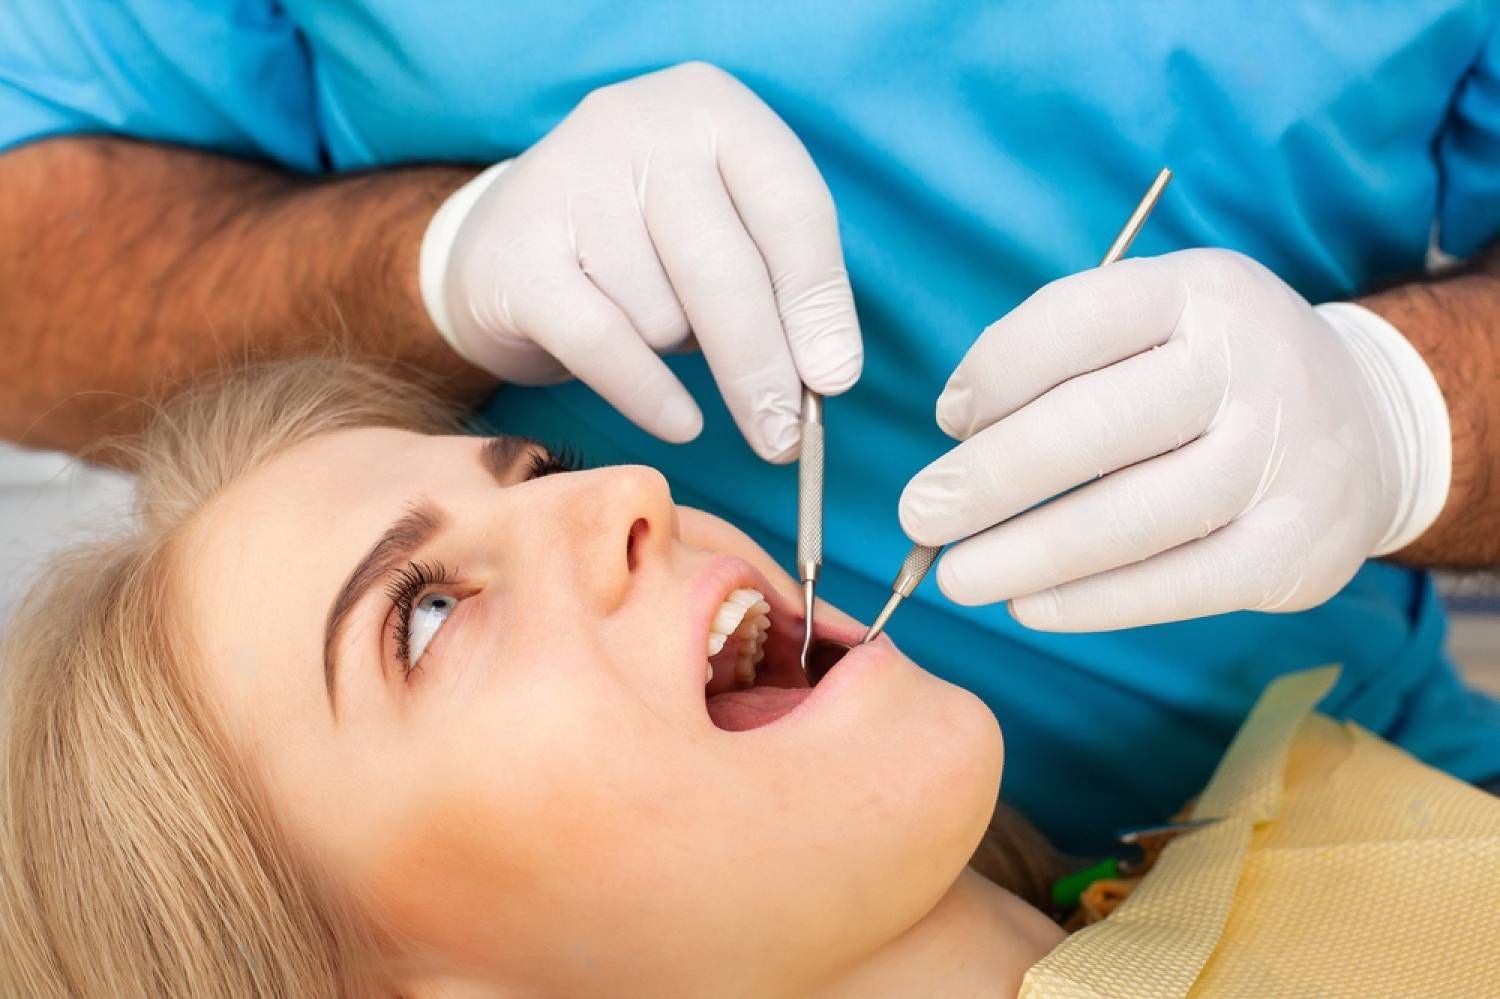 Woman Getting Teeth Worked on at Dentist | Adult and Pediatric Dentist in Missoula MT